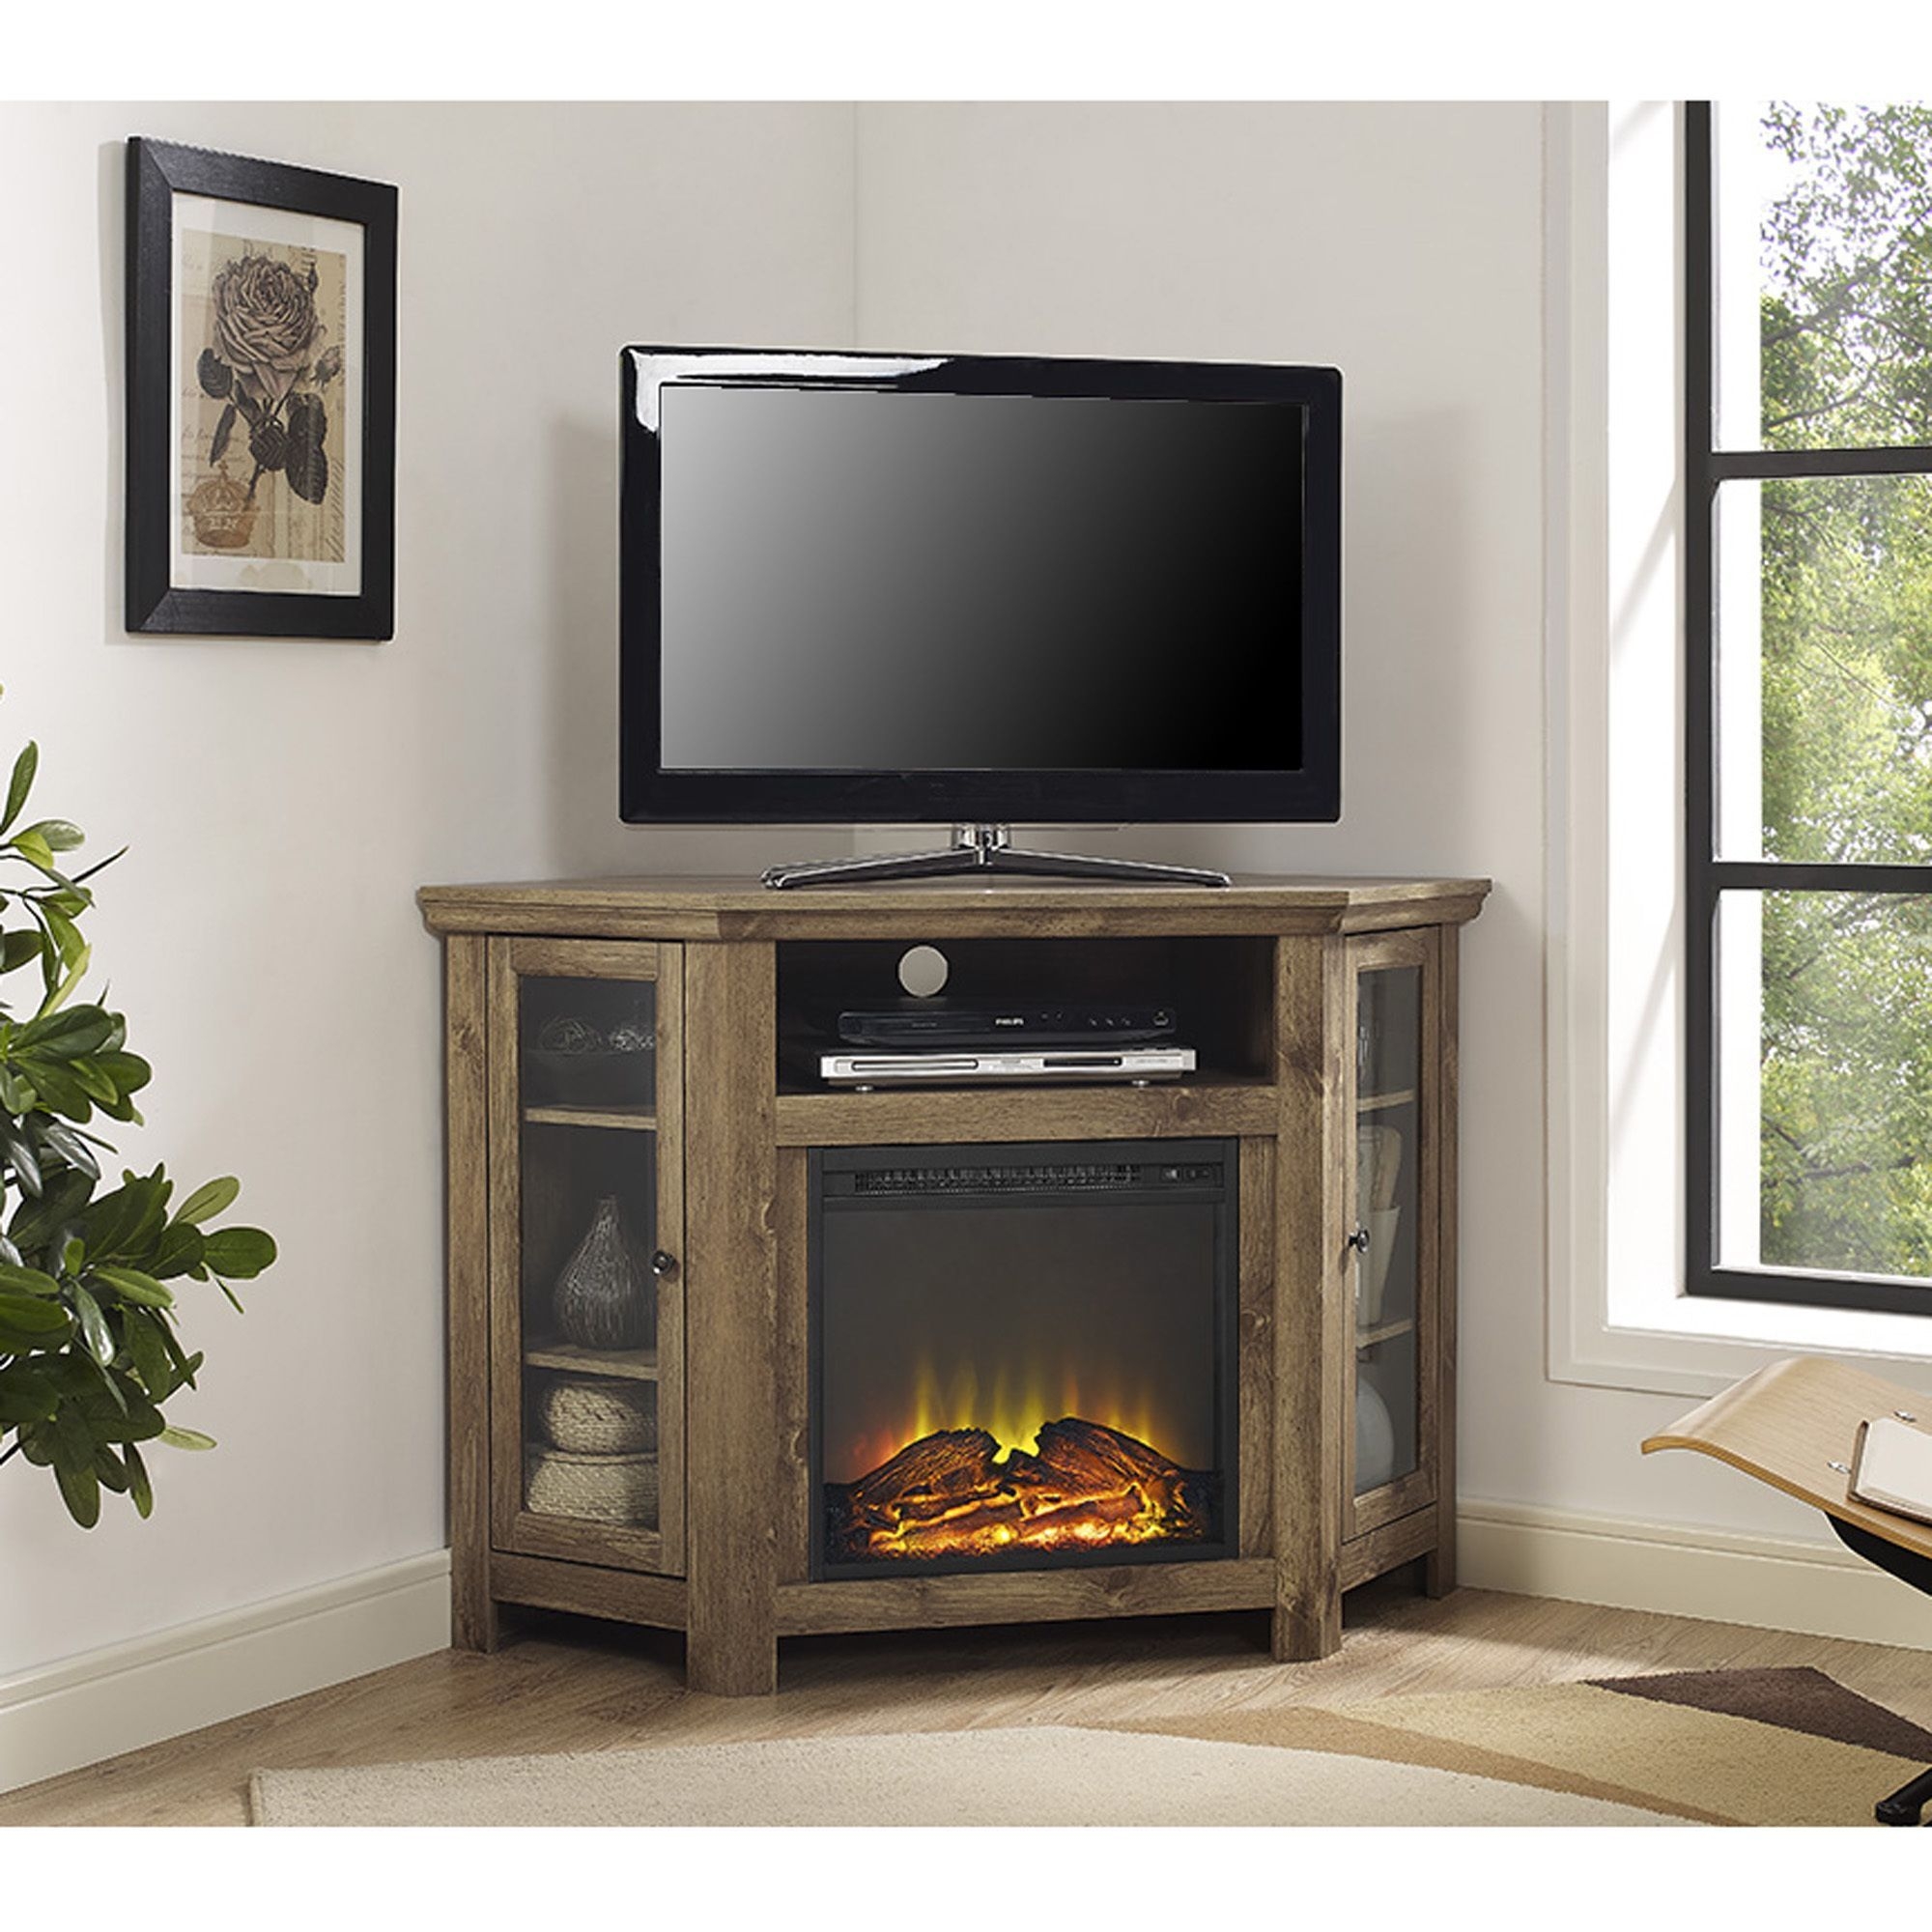 Corner Electric Fireplace Tv Stand, Corner Tv Stand With Fireplace 65 Cm